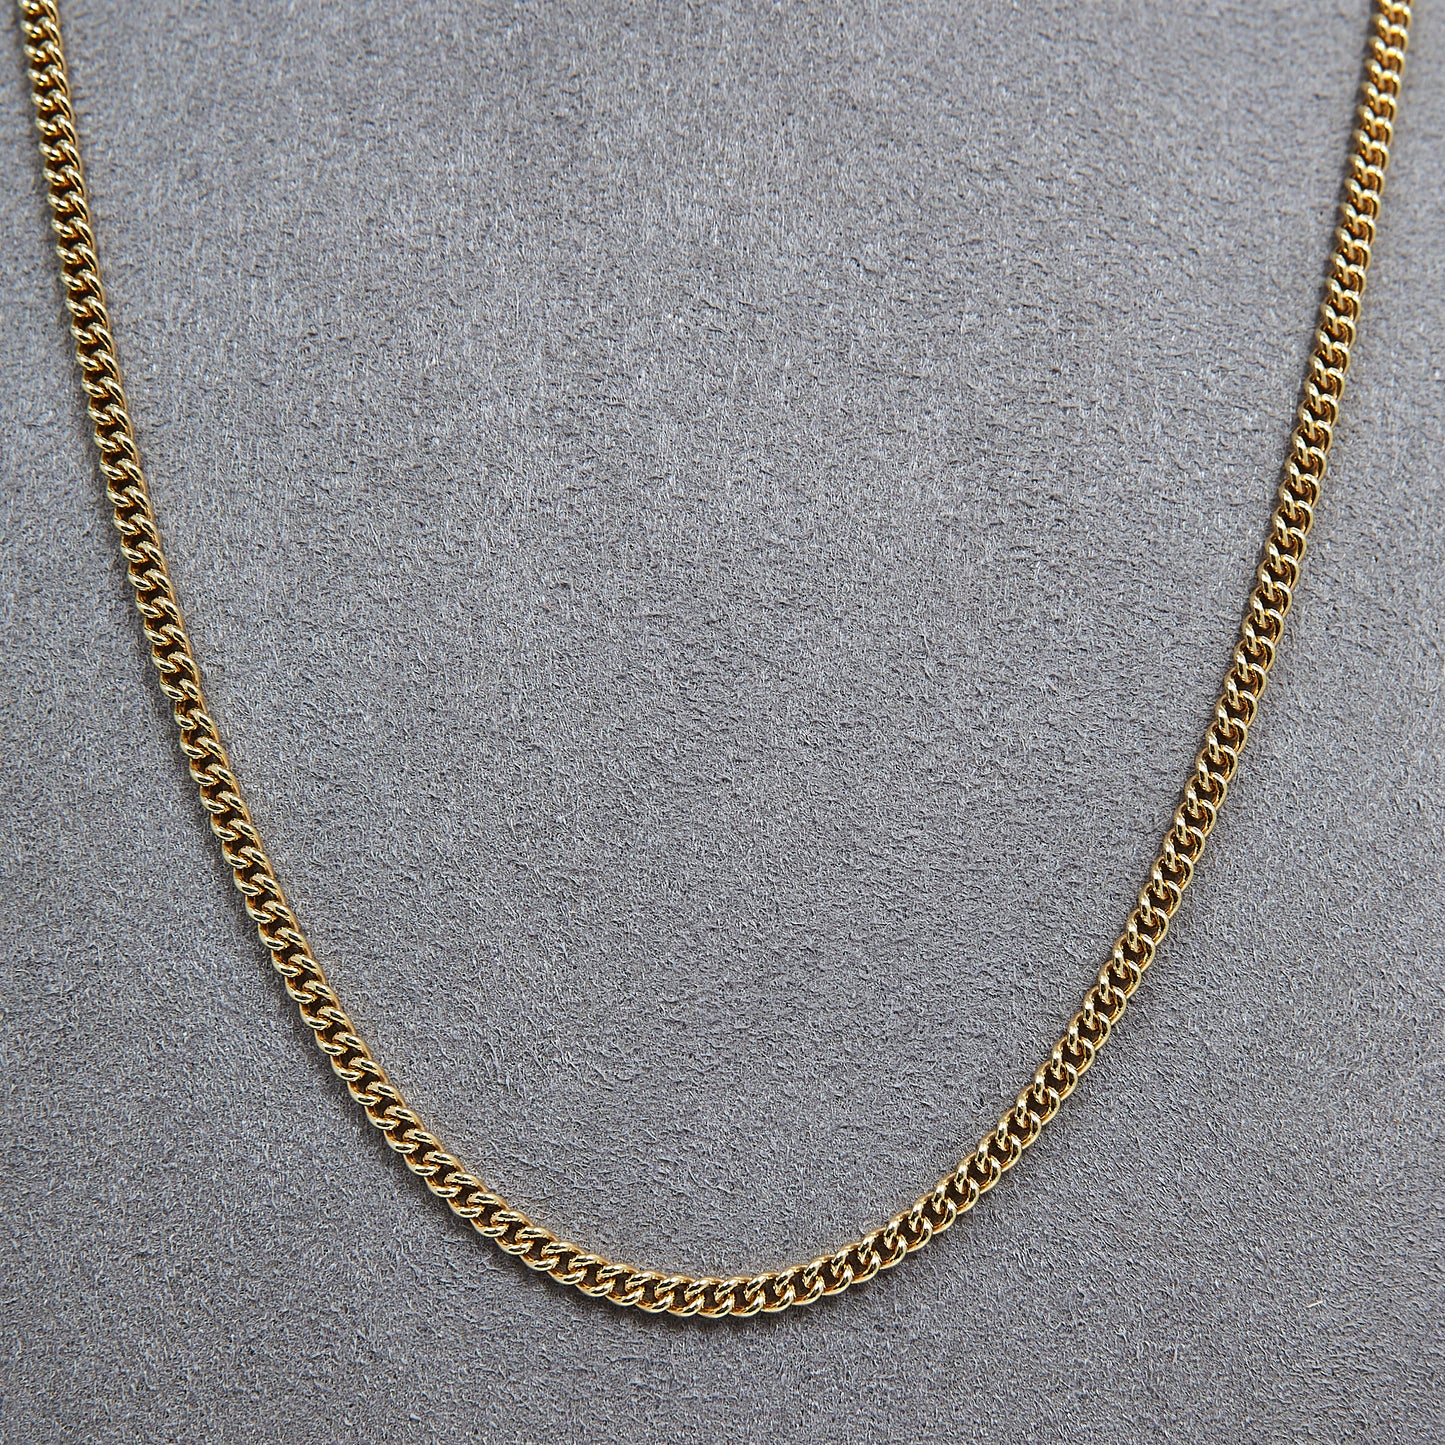 Pre-Owned 9ct Gold 18 Inch Rounded Curb Chain Necklace